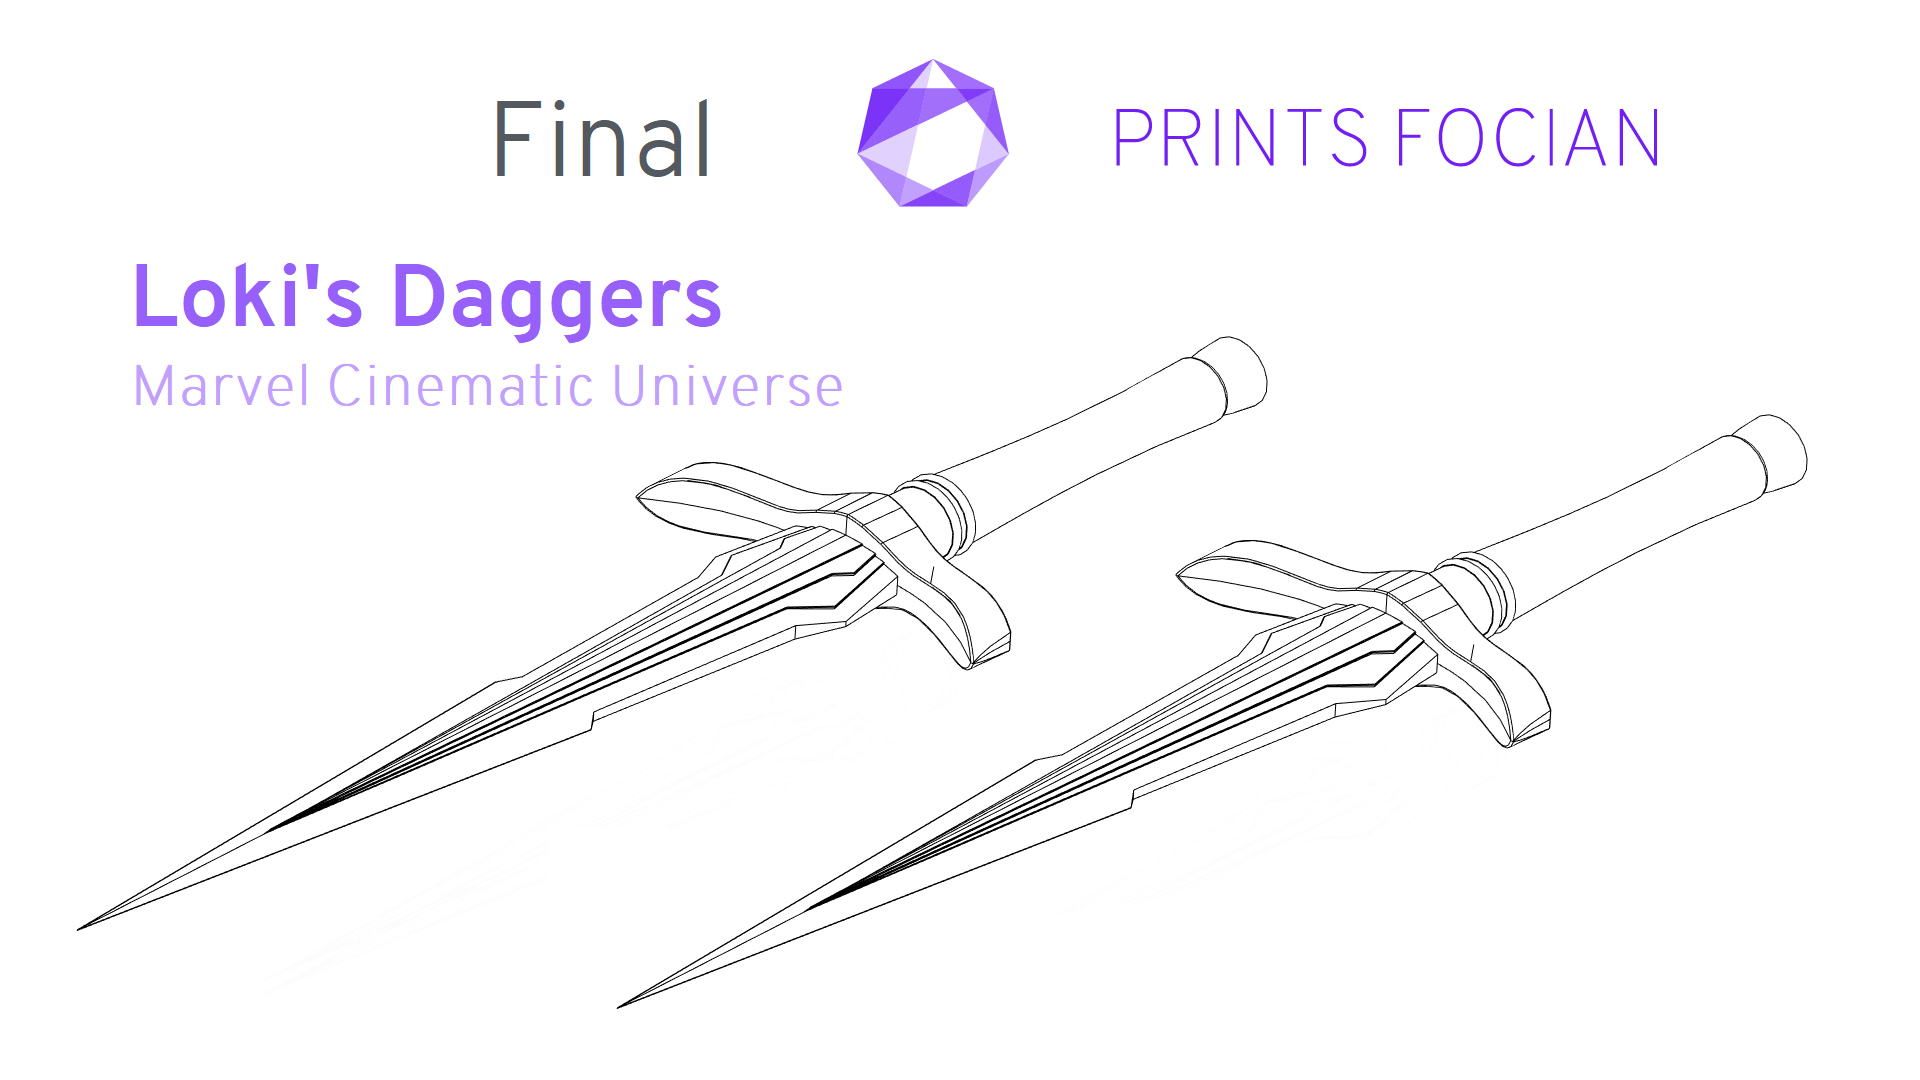 Wireframe image of the Loki's Daggers on a white background. Prints Focian Icon top and central. Text: Purple Prints Focian, Loki's Daggers, Marvel Cinimatic Universe MCU and dark grey Final